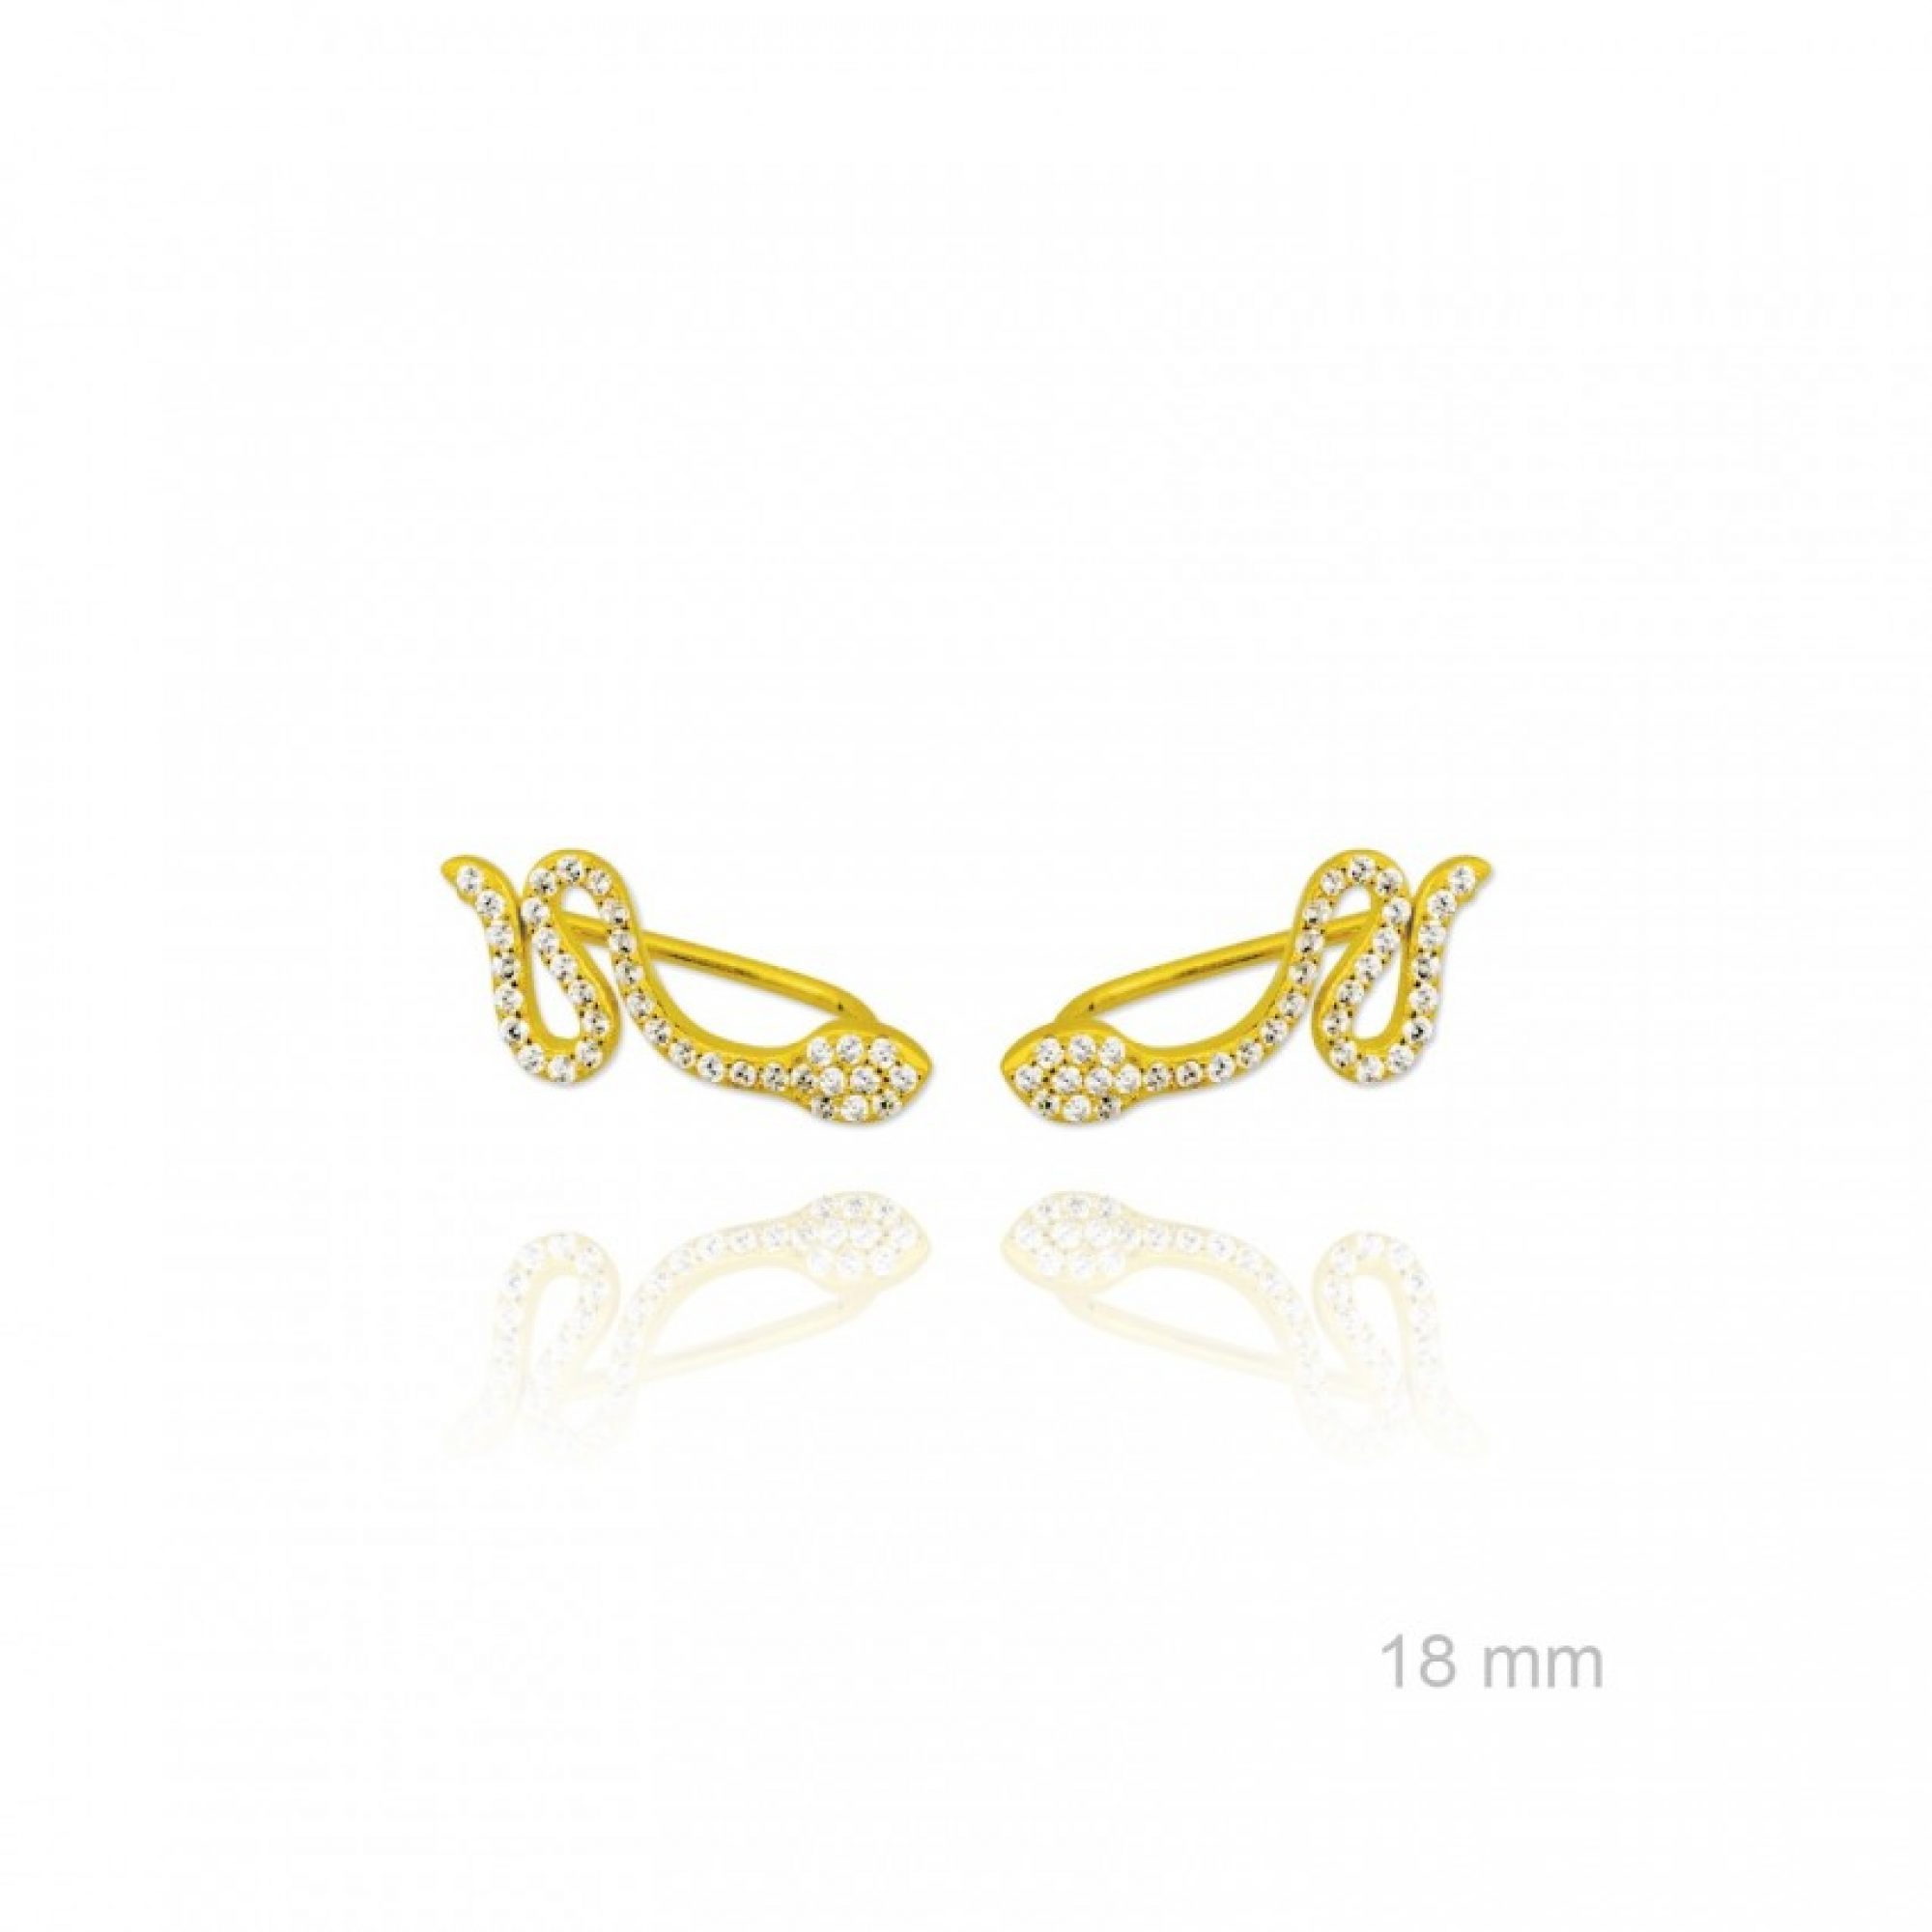 Gold plated snake ear climbers with zircon stones